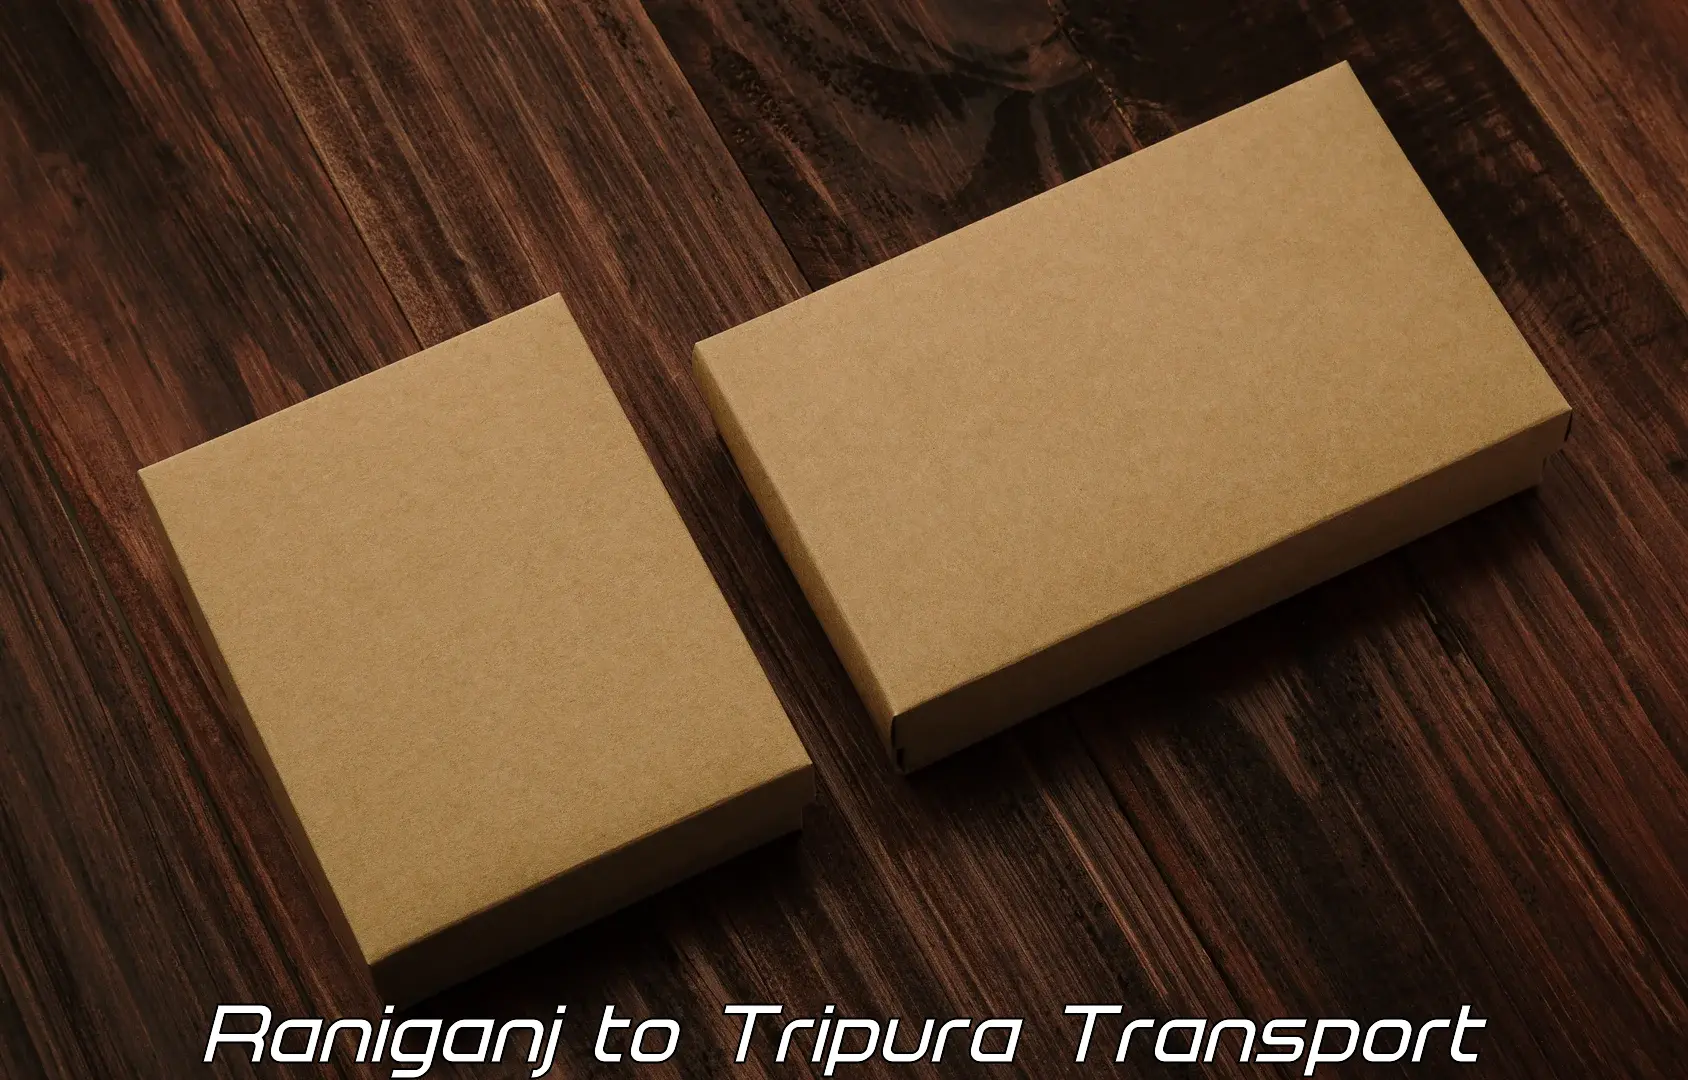 Express transport services in Raniganj to North Tripura